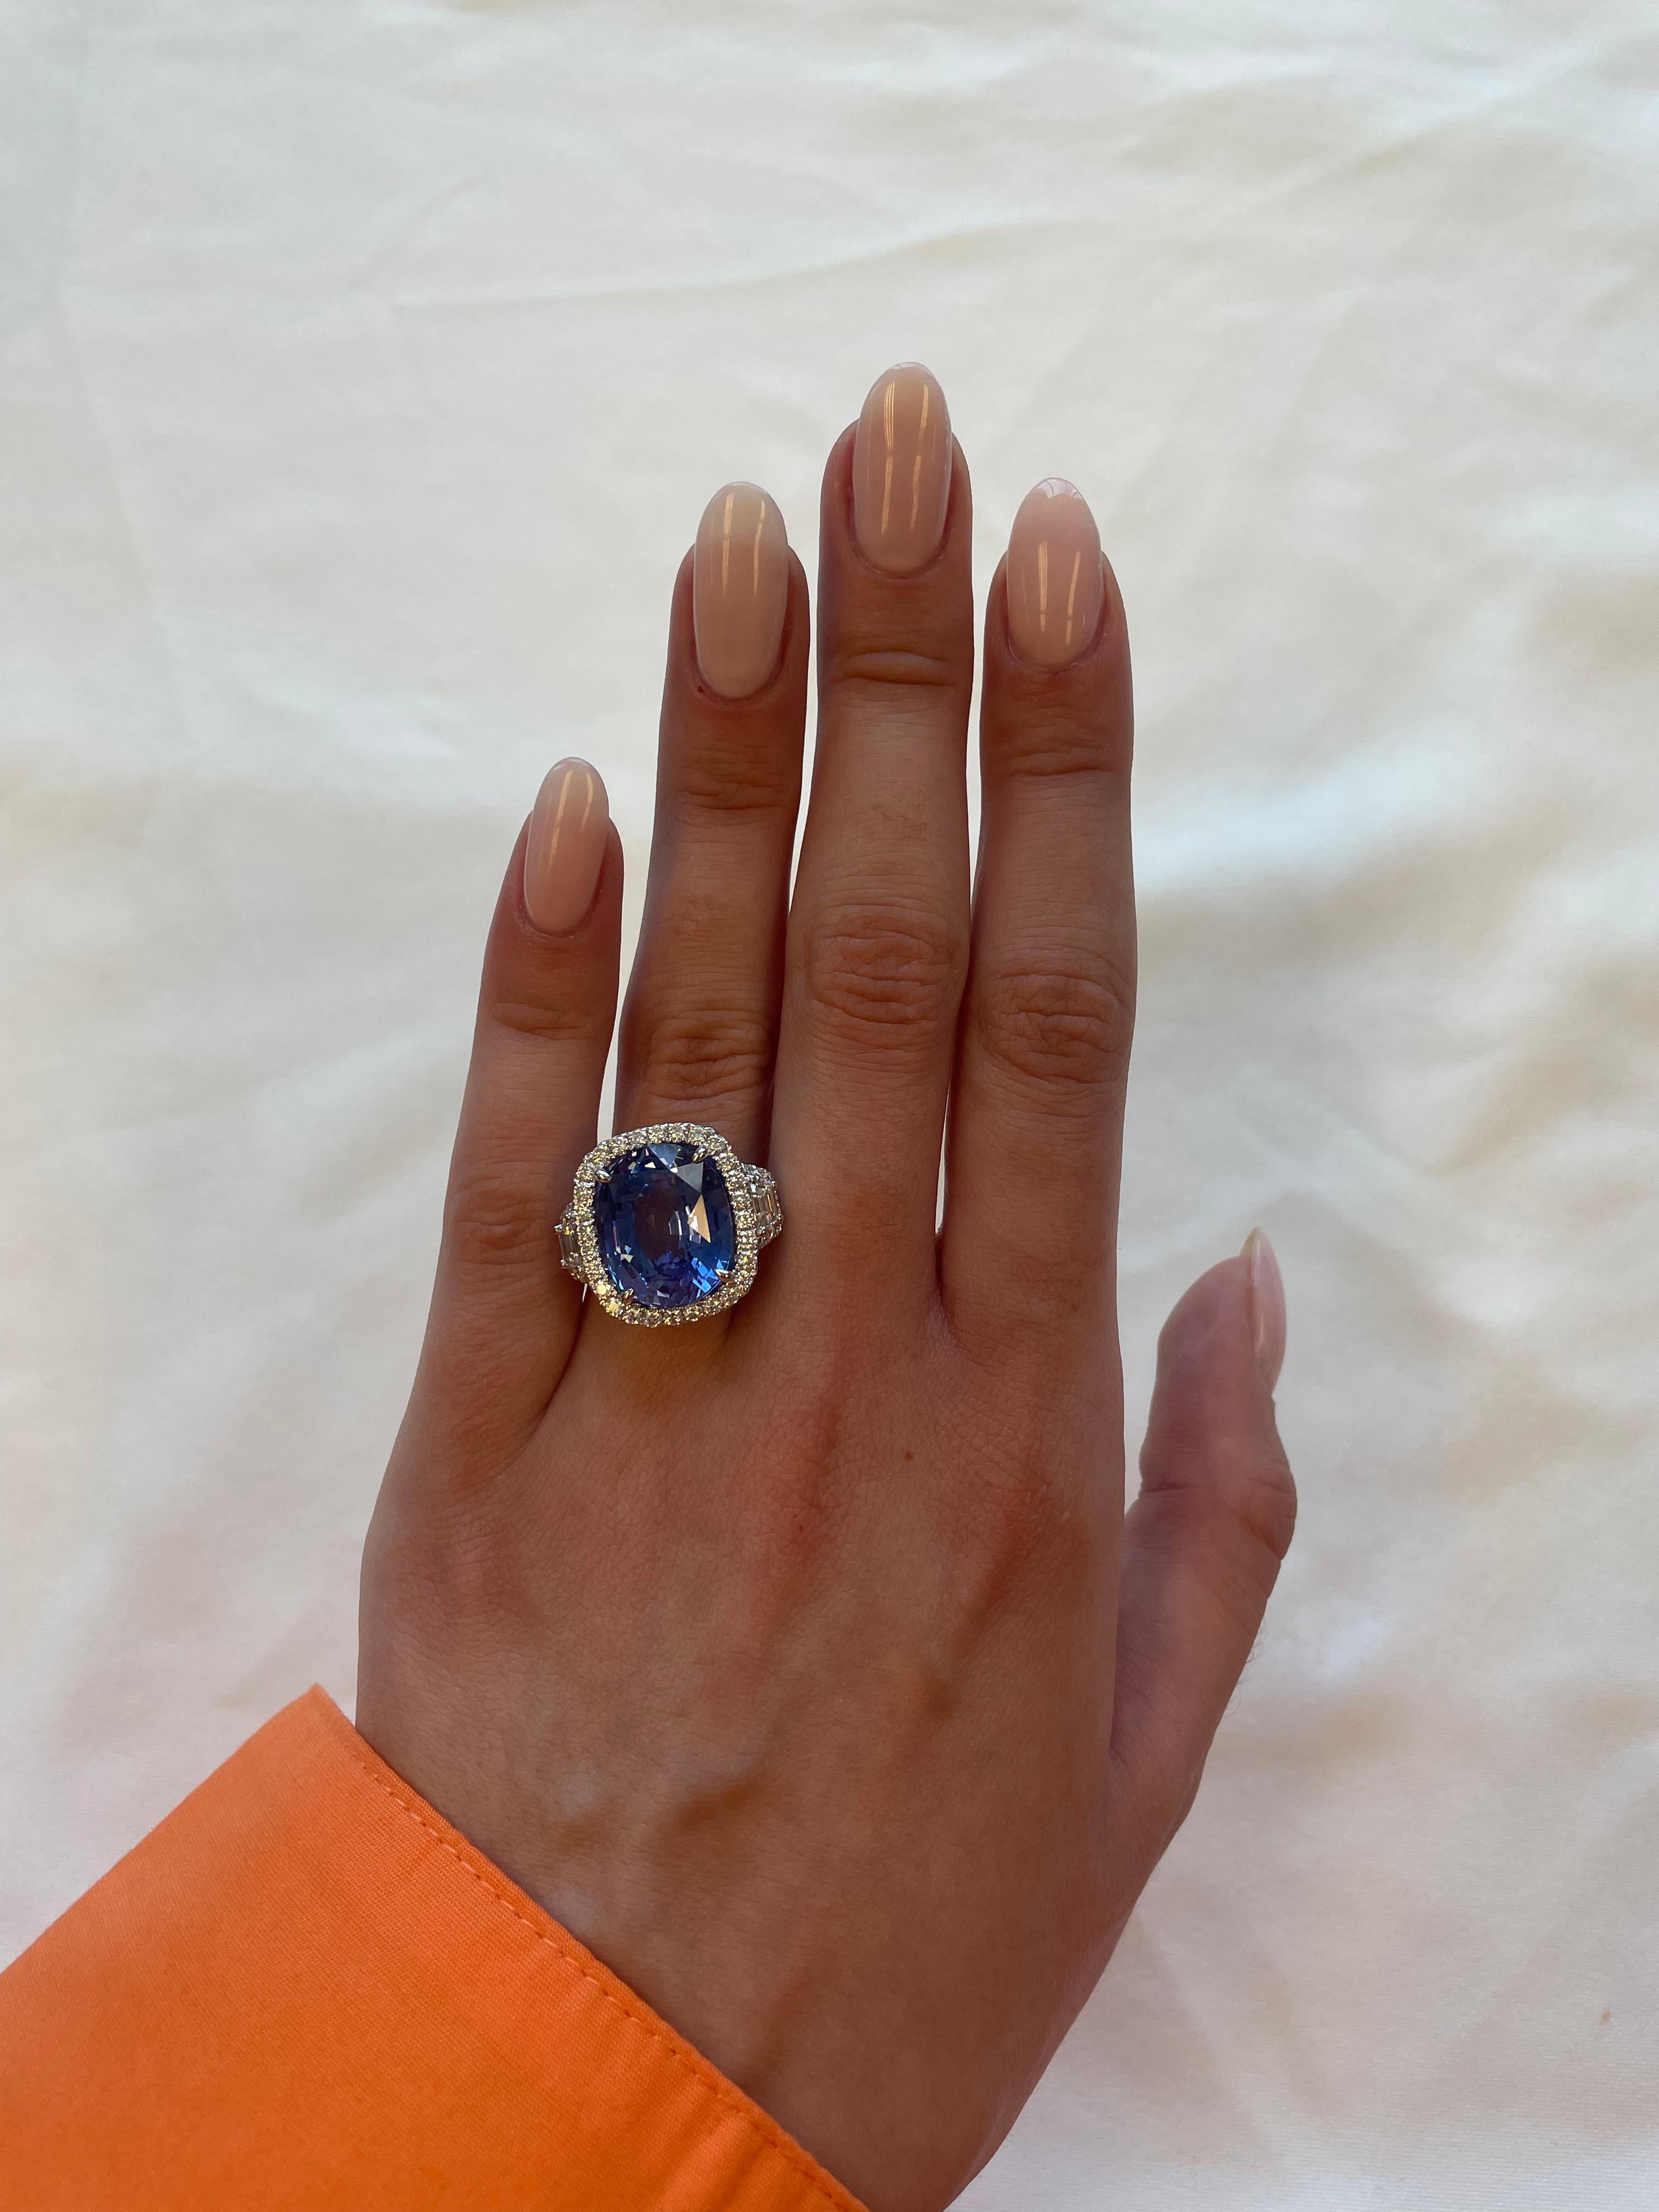 Stunning Ceylon sapphire and diamond halo ring, GIA certified. High jewelry by Alexander Beverly Hills. 
14.84 carats total gemstone weight.
GIA certified 13.20 carat cushion sapphire, Sri Lanka (Ceylon) origin, heat. Complimented with trapezoid and